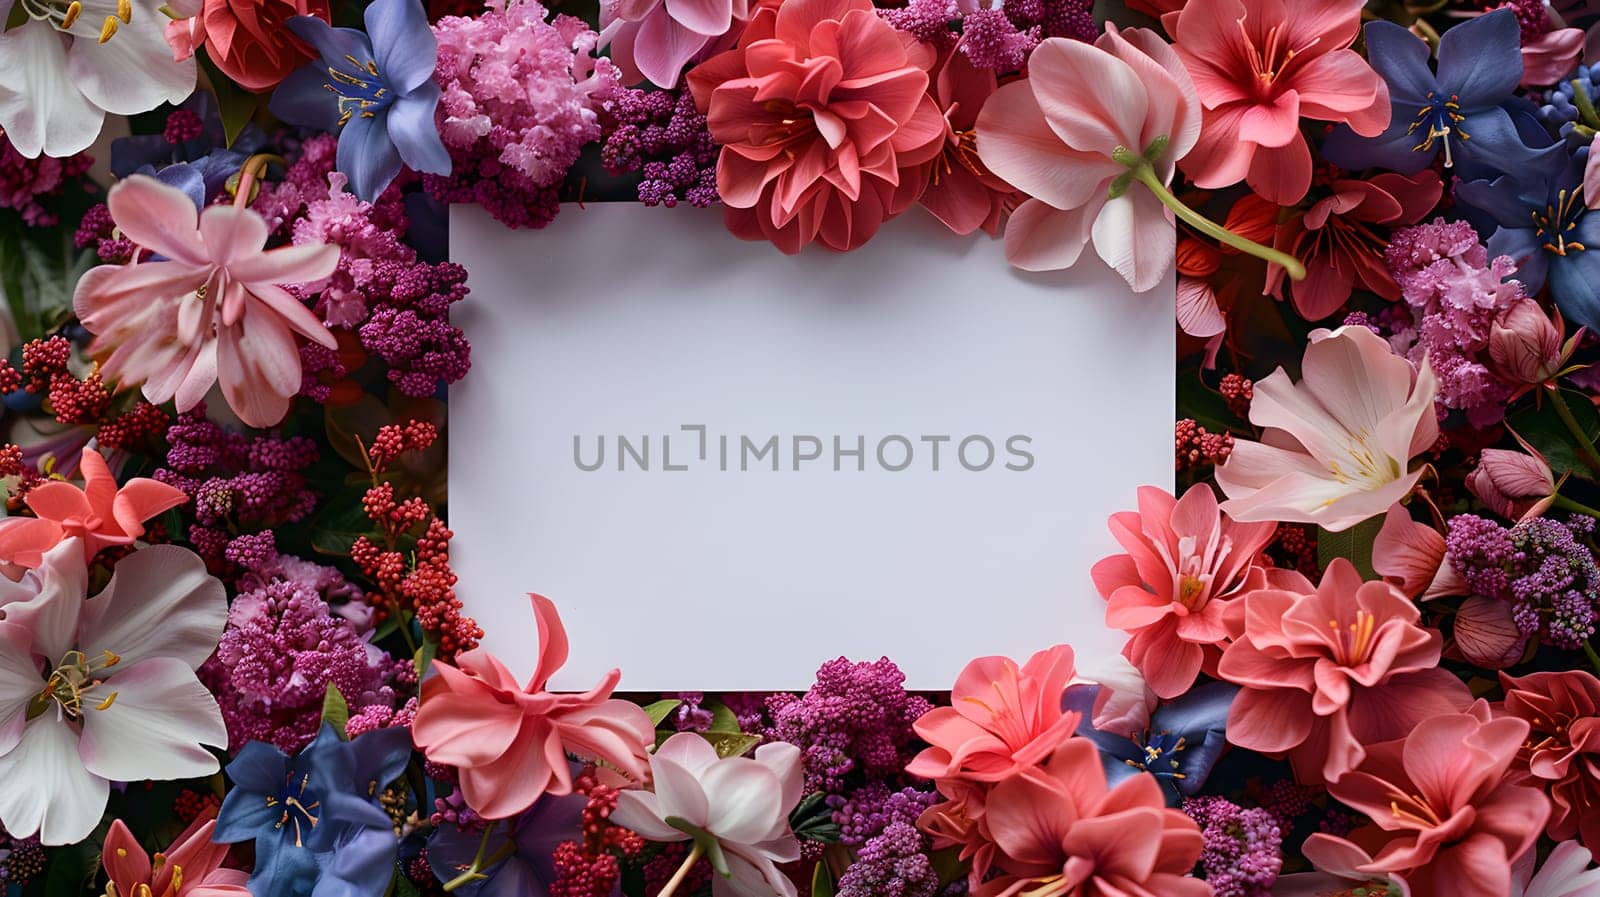 A white card is artfully placed among a vibrant display of colorful flowers, including pink and magenta petals, creating a beautiful contrast in the garden